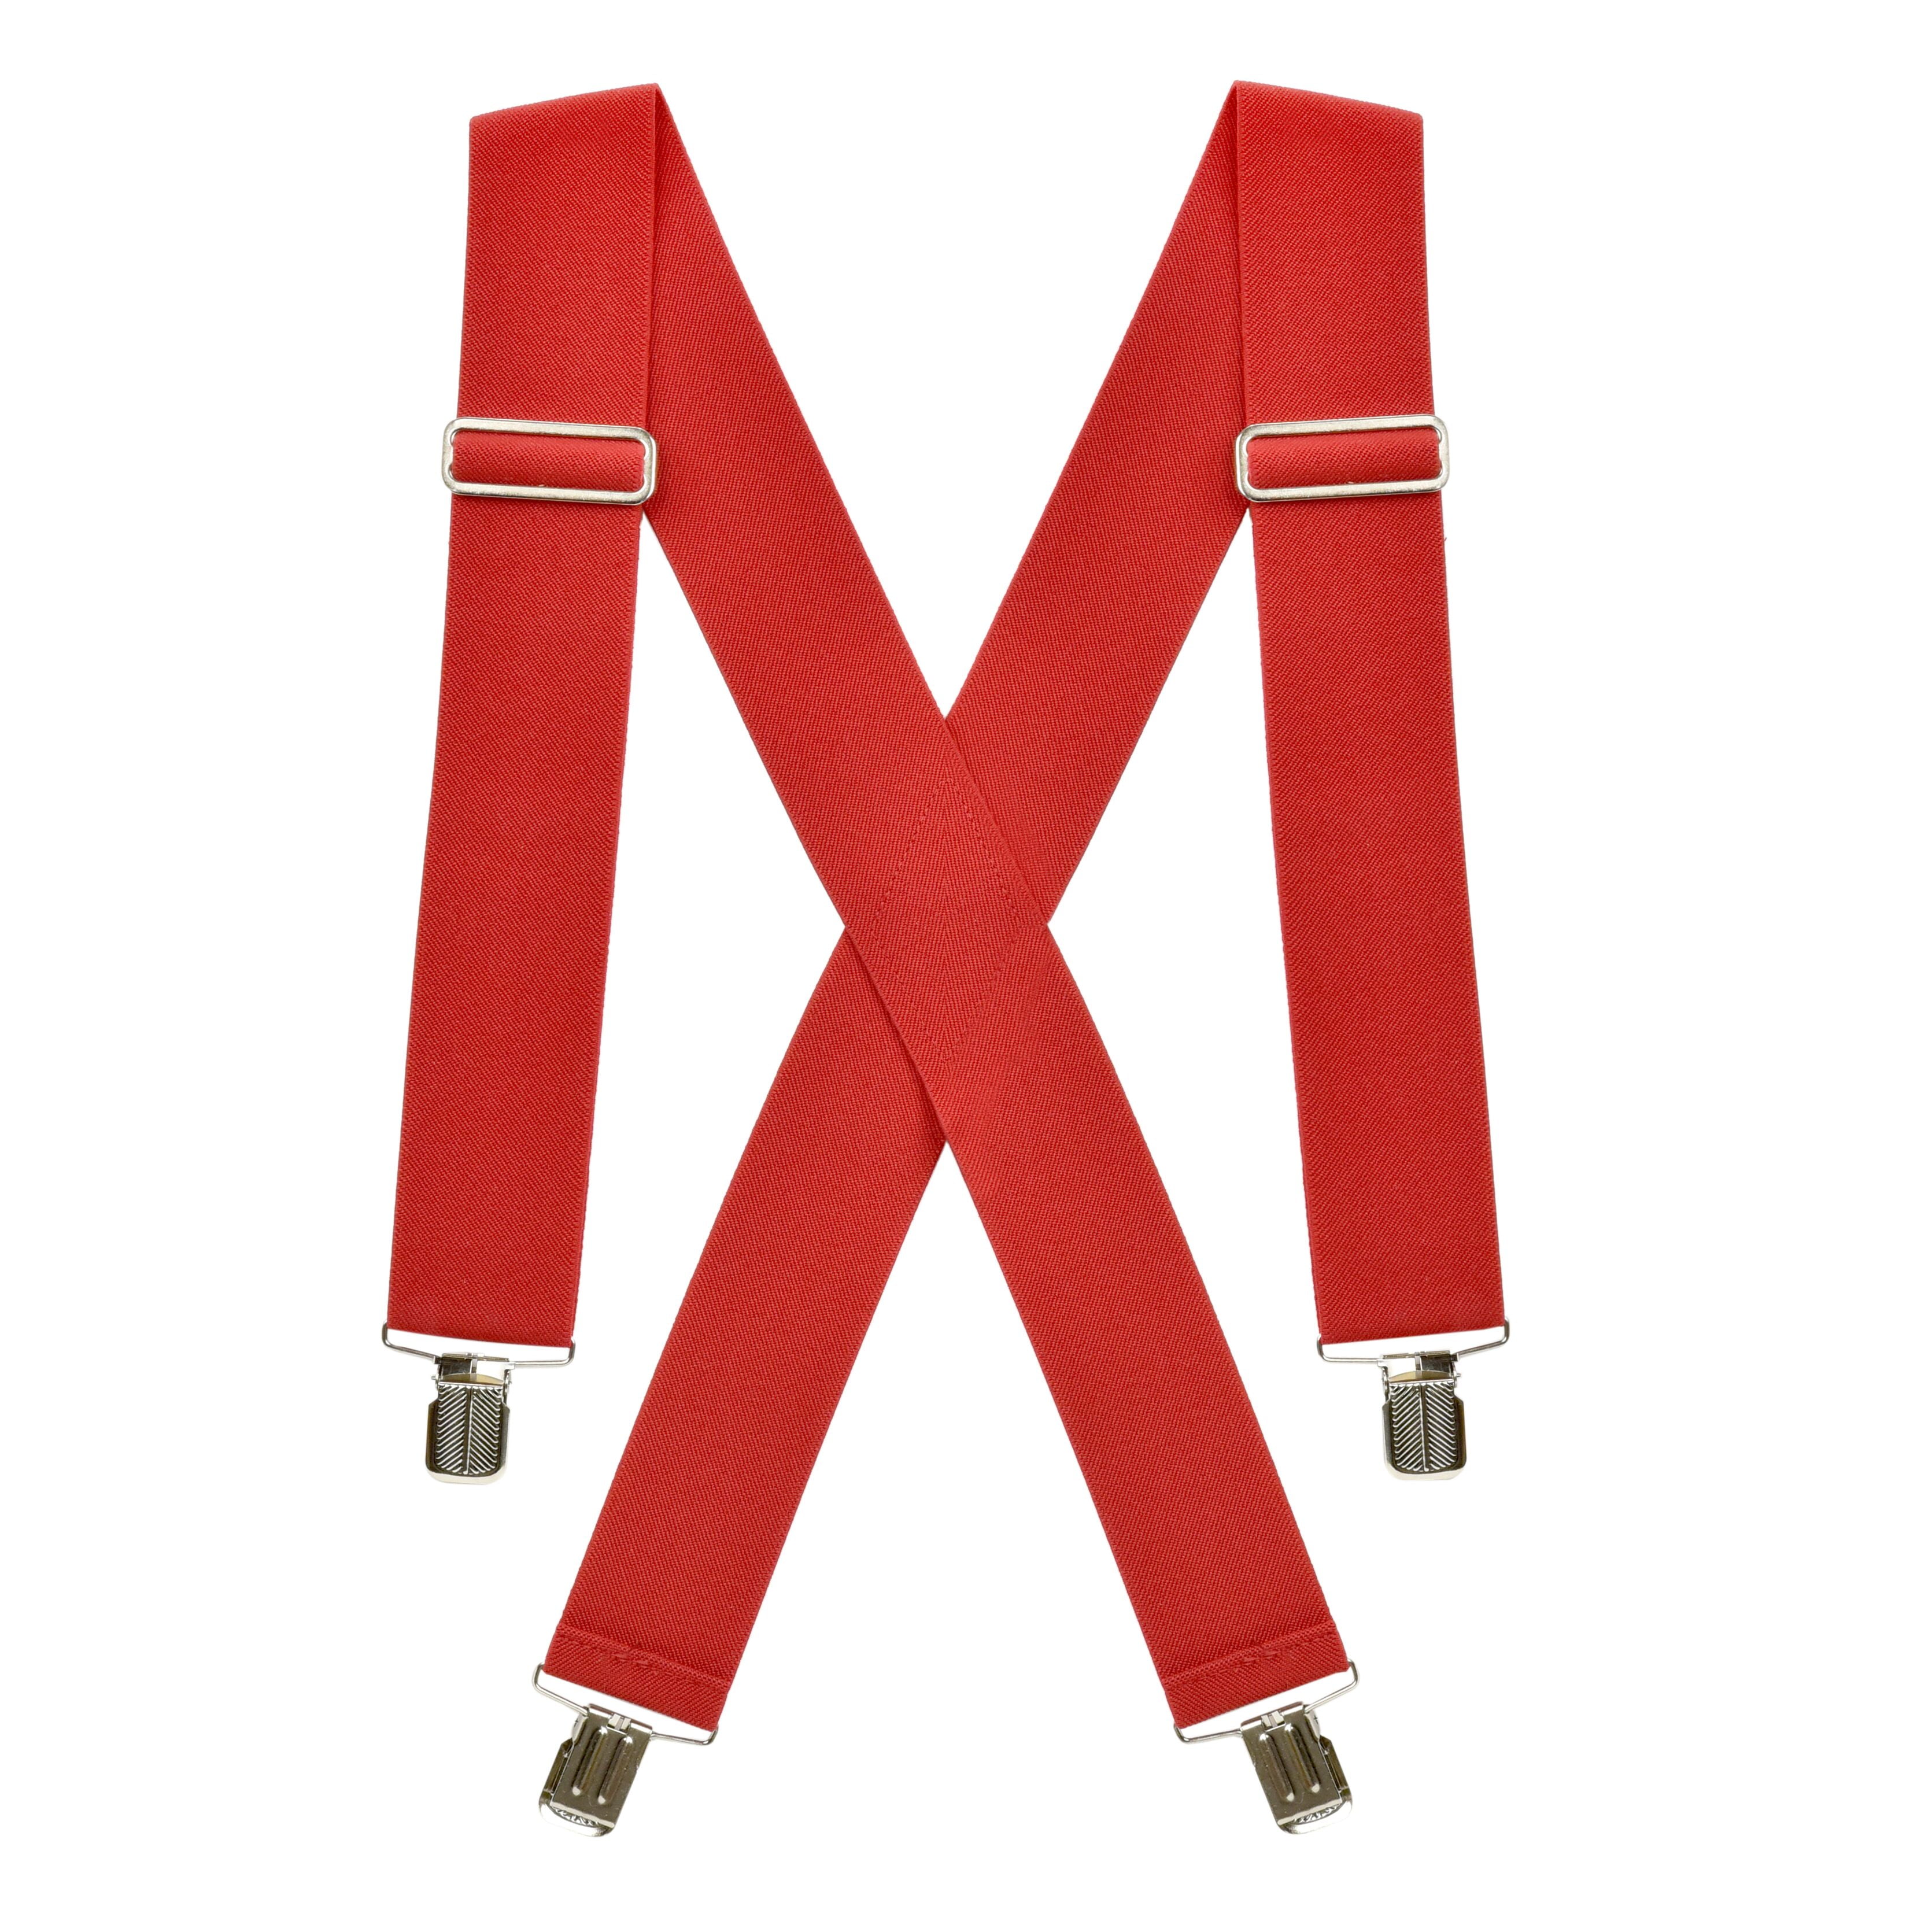 Hold'em Heavy Duty X-Back Adjustable Work Suspender with Extra Heavy Clips - Red (Available in 3 Colors), Men's